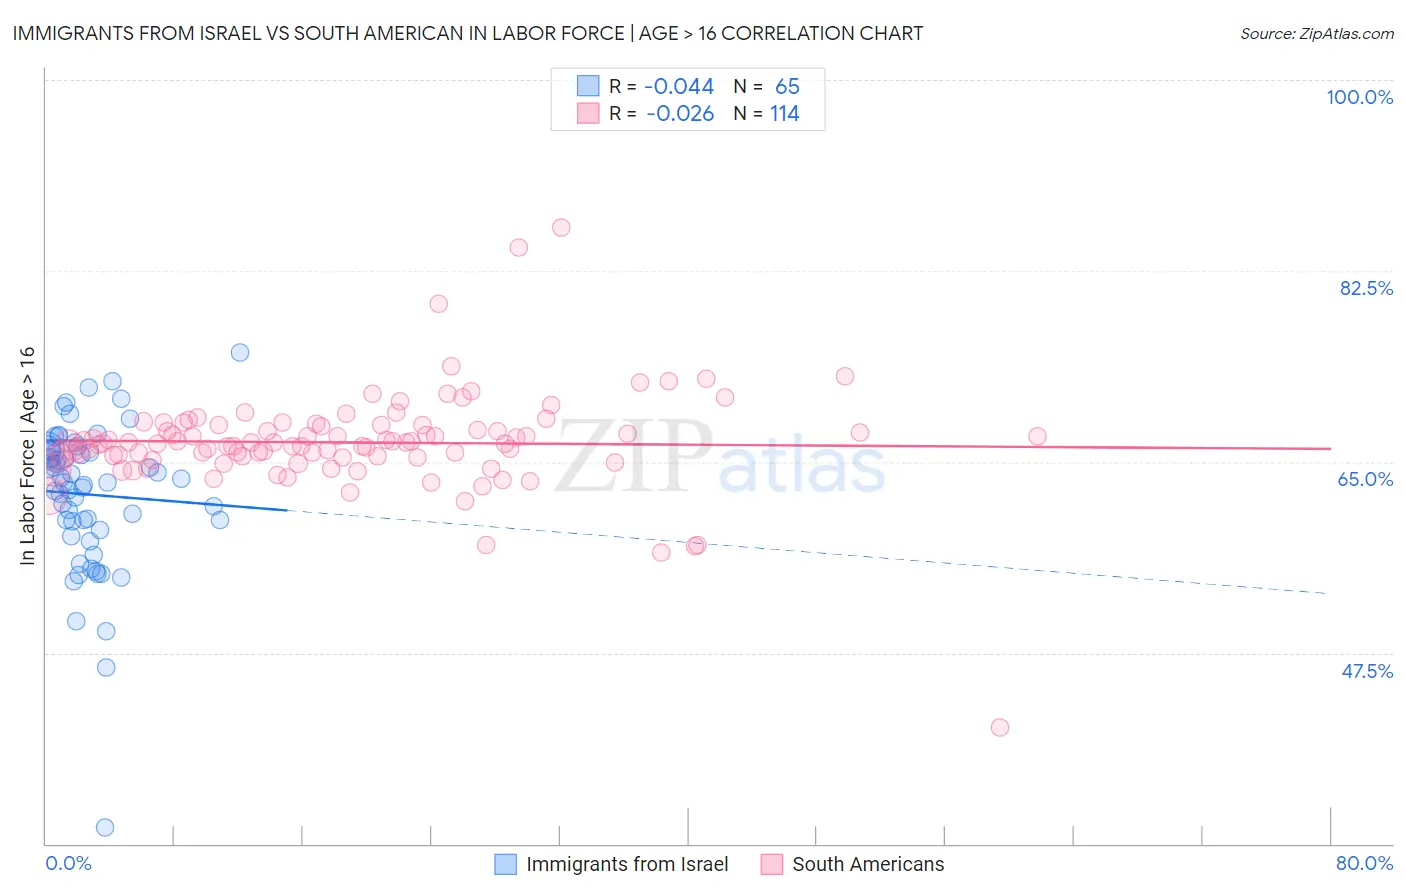 Immigrants from Israel vs South American In Labor Force | Age > 16